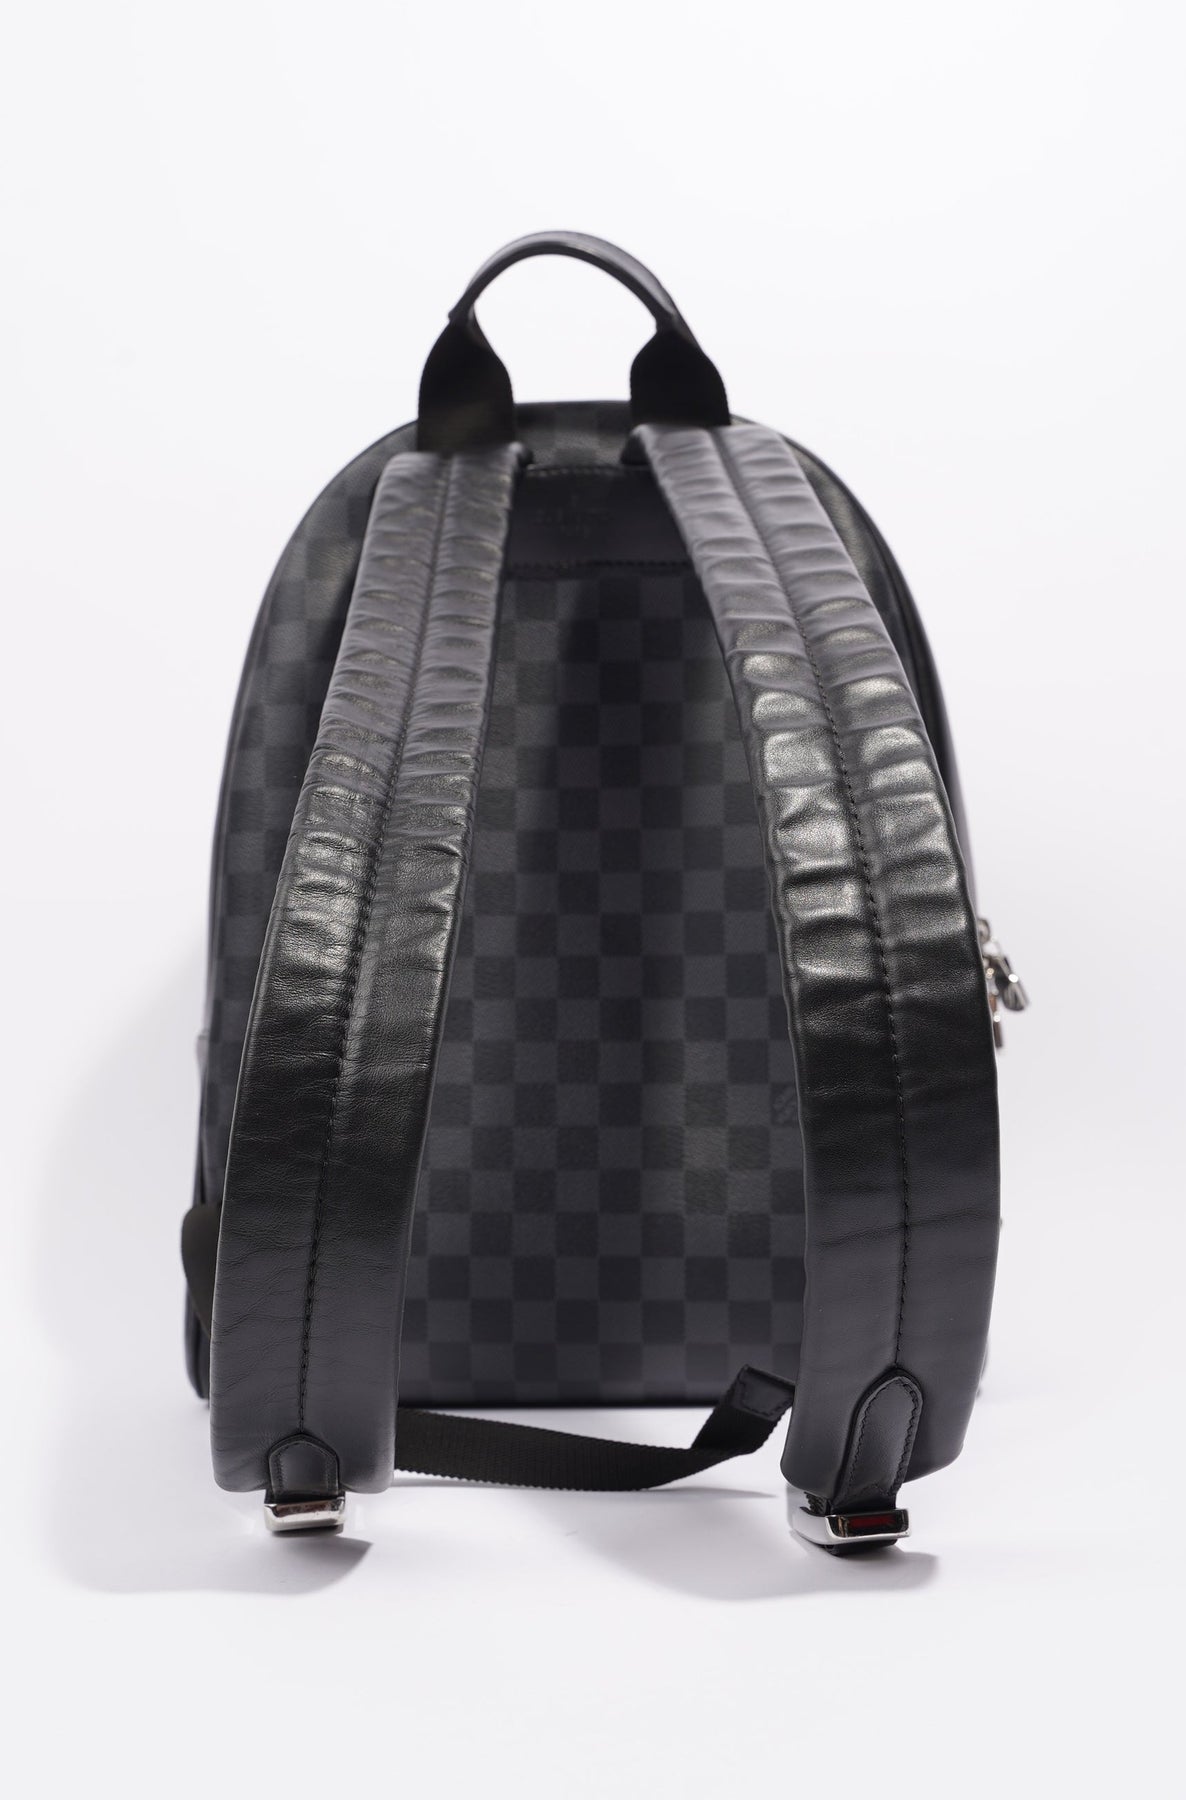 Louis Vuitton-Damier Graphite Josh Backpack - Couture Traders